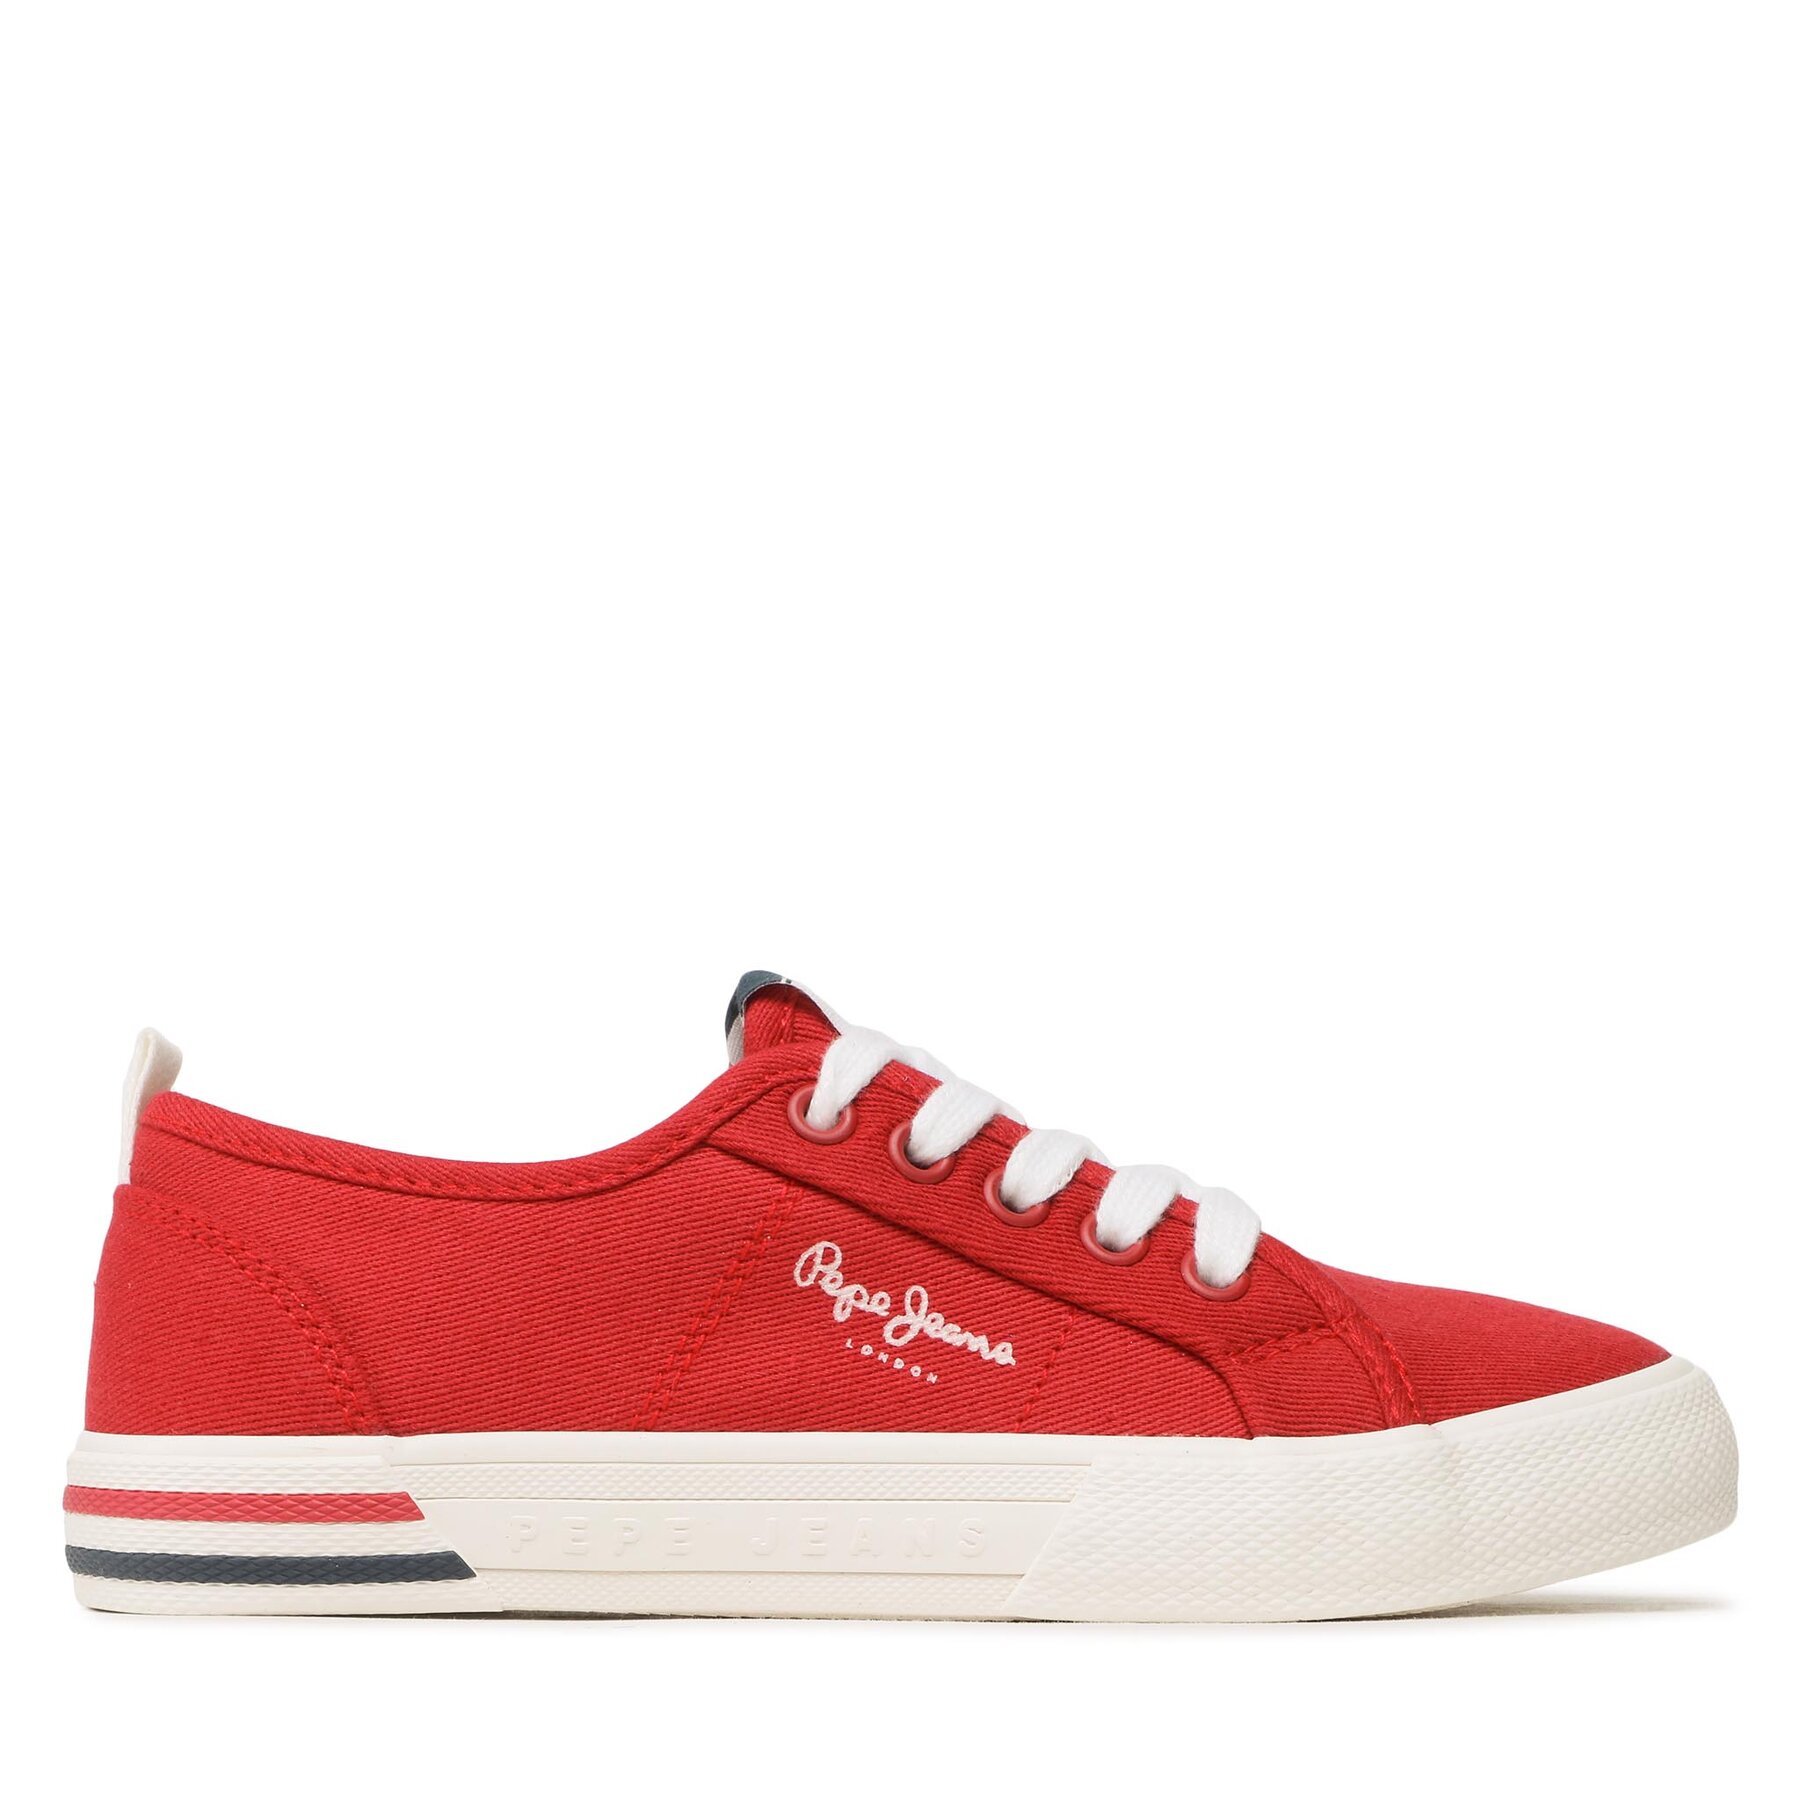 Sneakers Pepe Jeans Brady Basic Boy PBS30549 Red 255 von Pepe Jeans